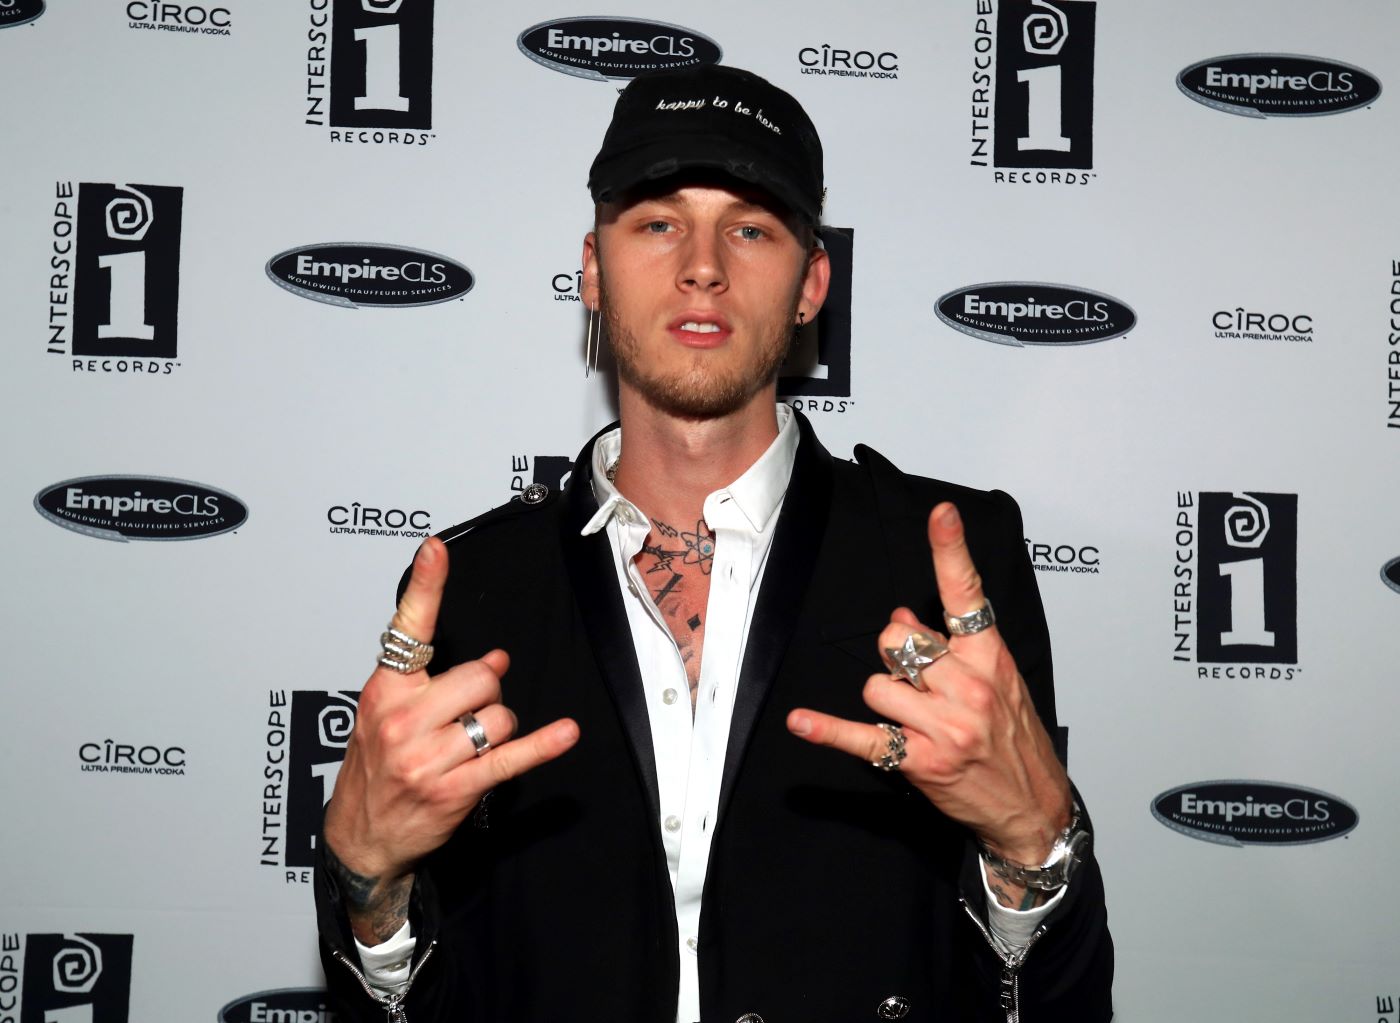 Machine Gun Kelly in a black suit with a white shirt in front of a white background with writing on it.